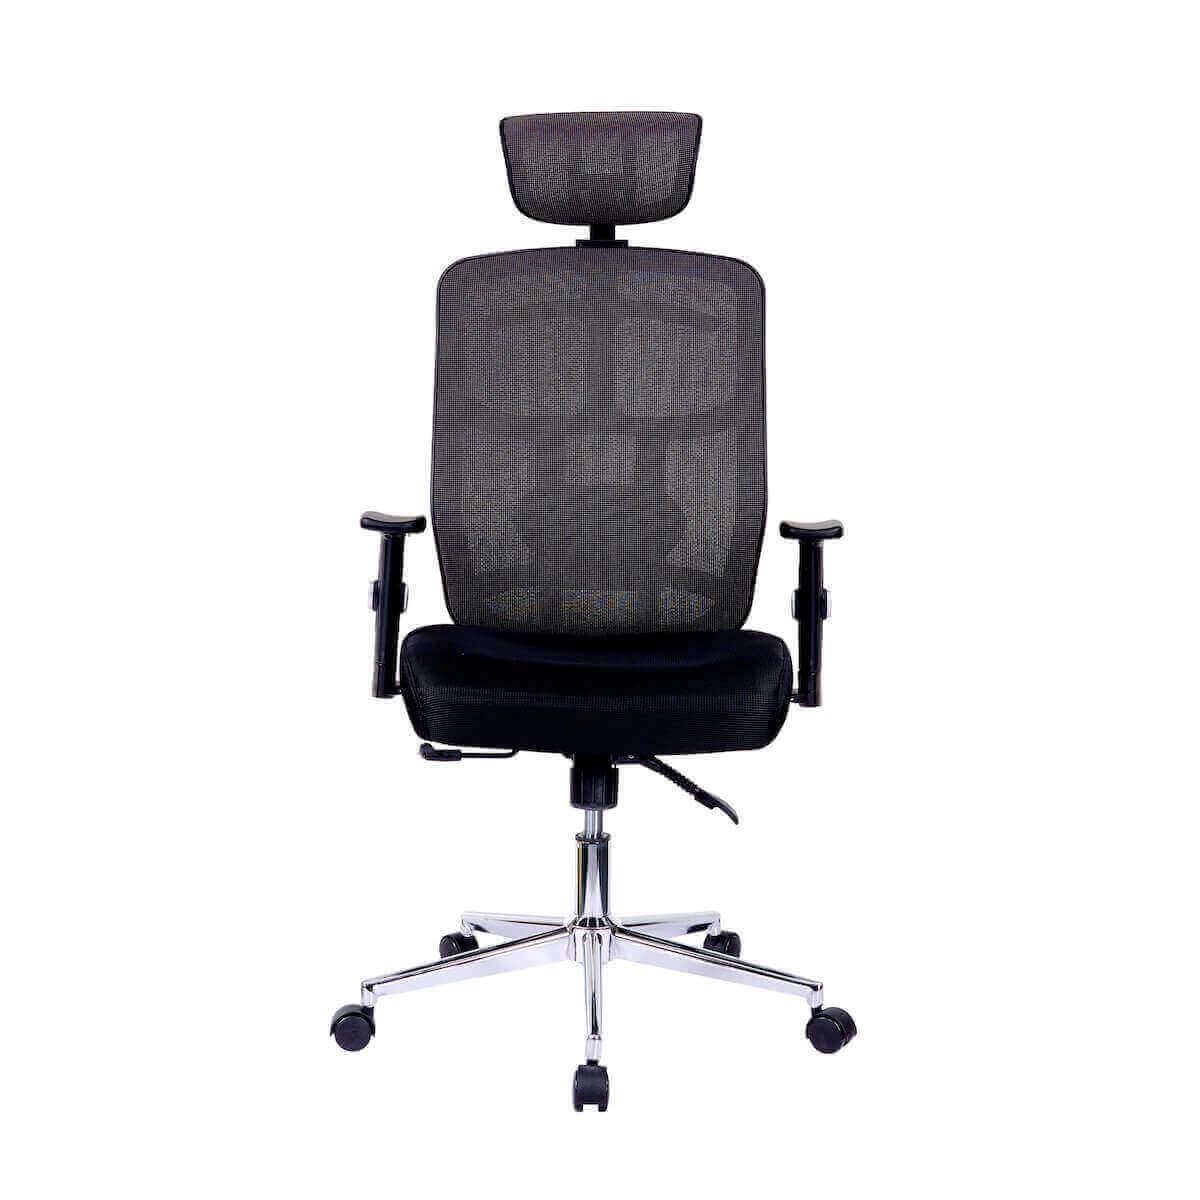 Techni Mobili Black High Back Executive Mesh Office Chair with Arms, Lumbar Support, and Chrome Base RTA-1010-BK